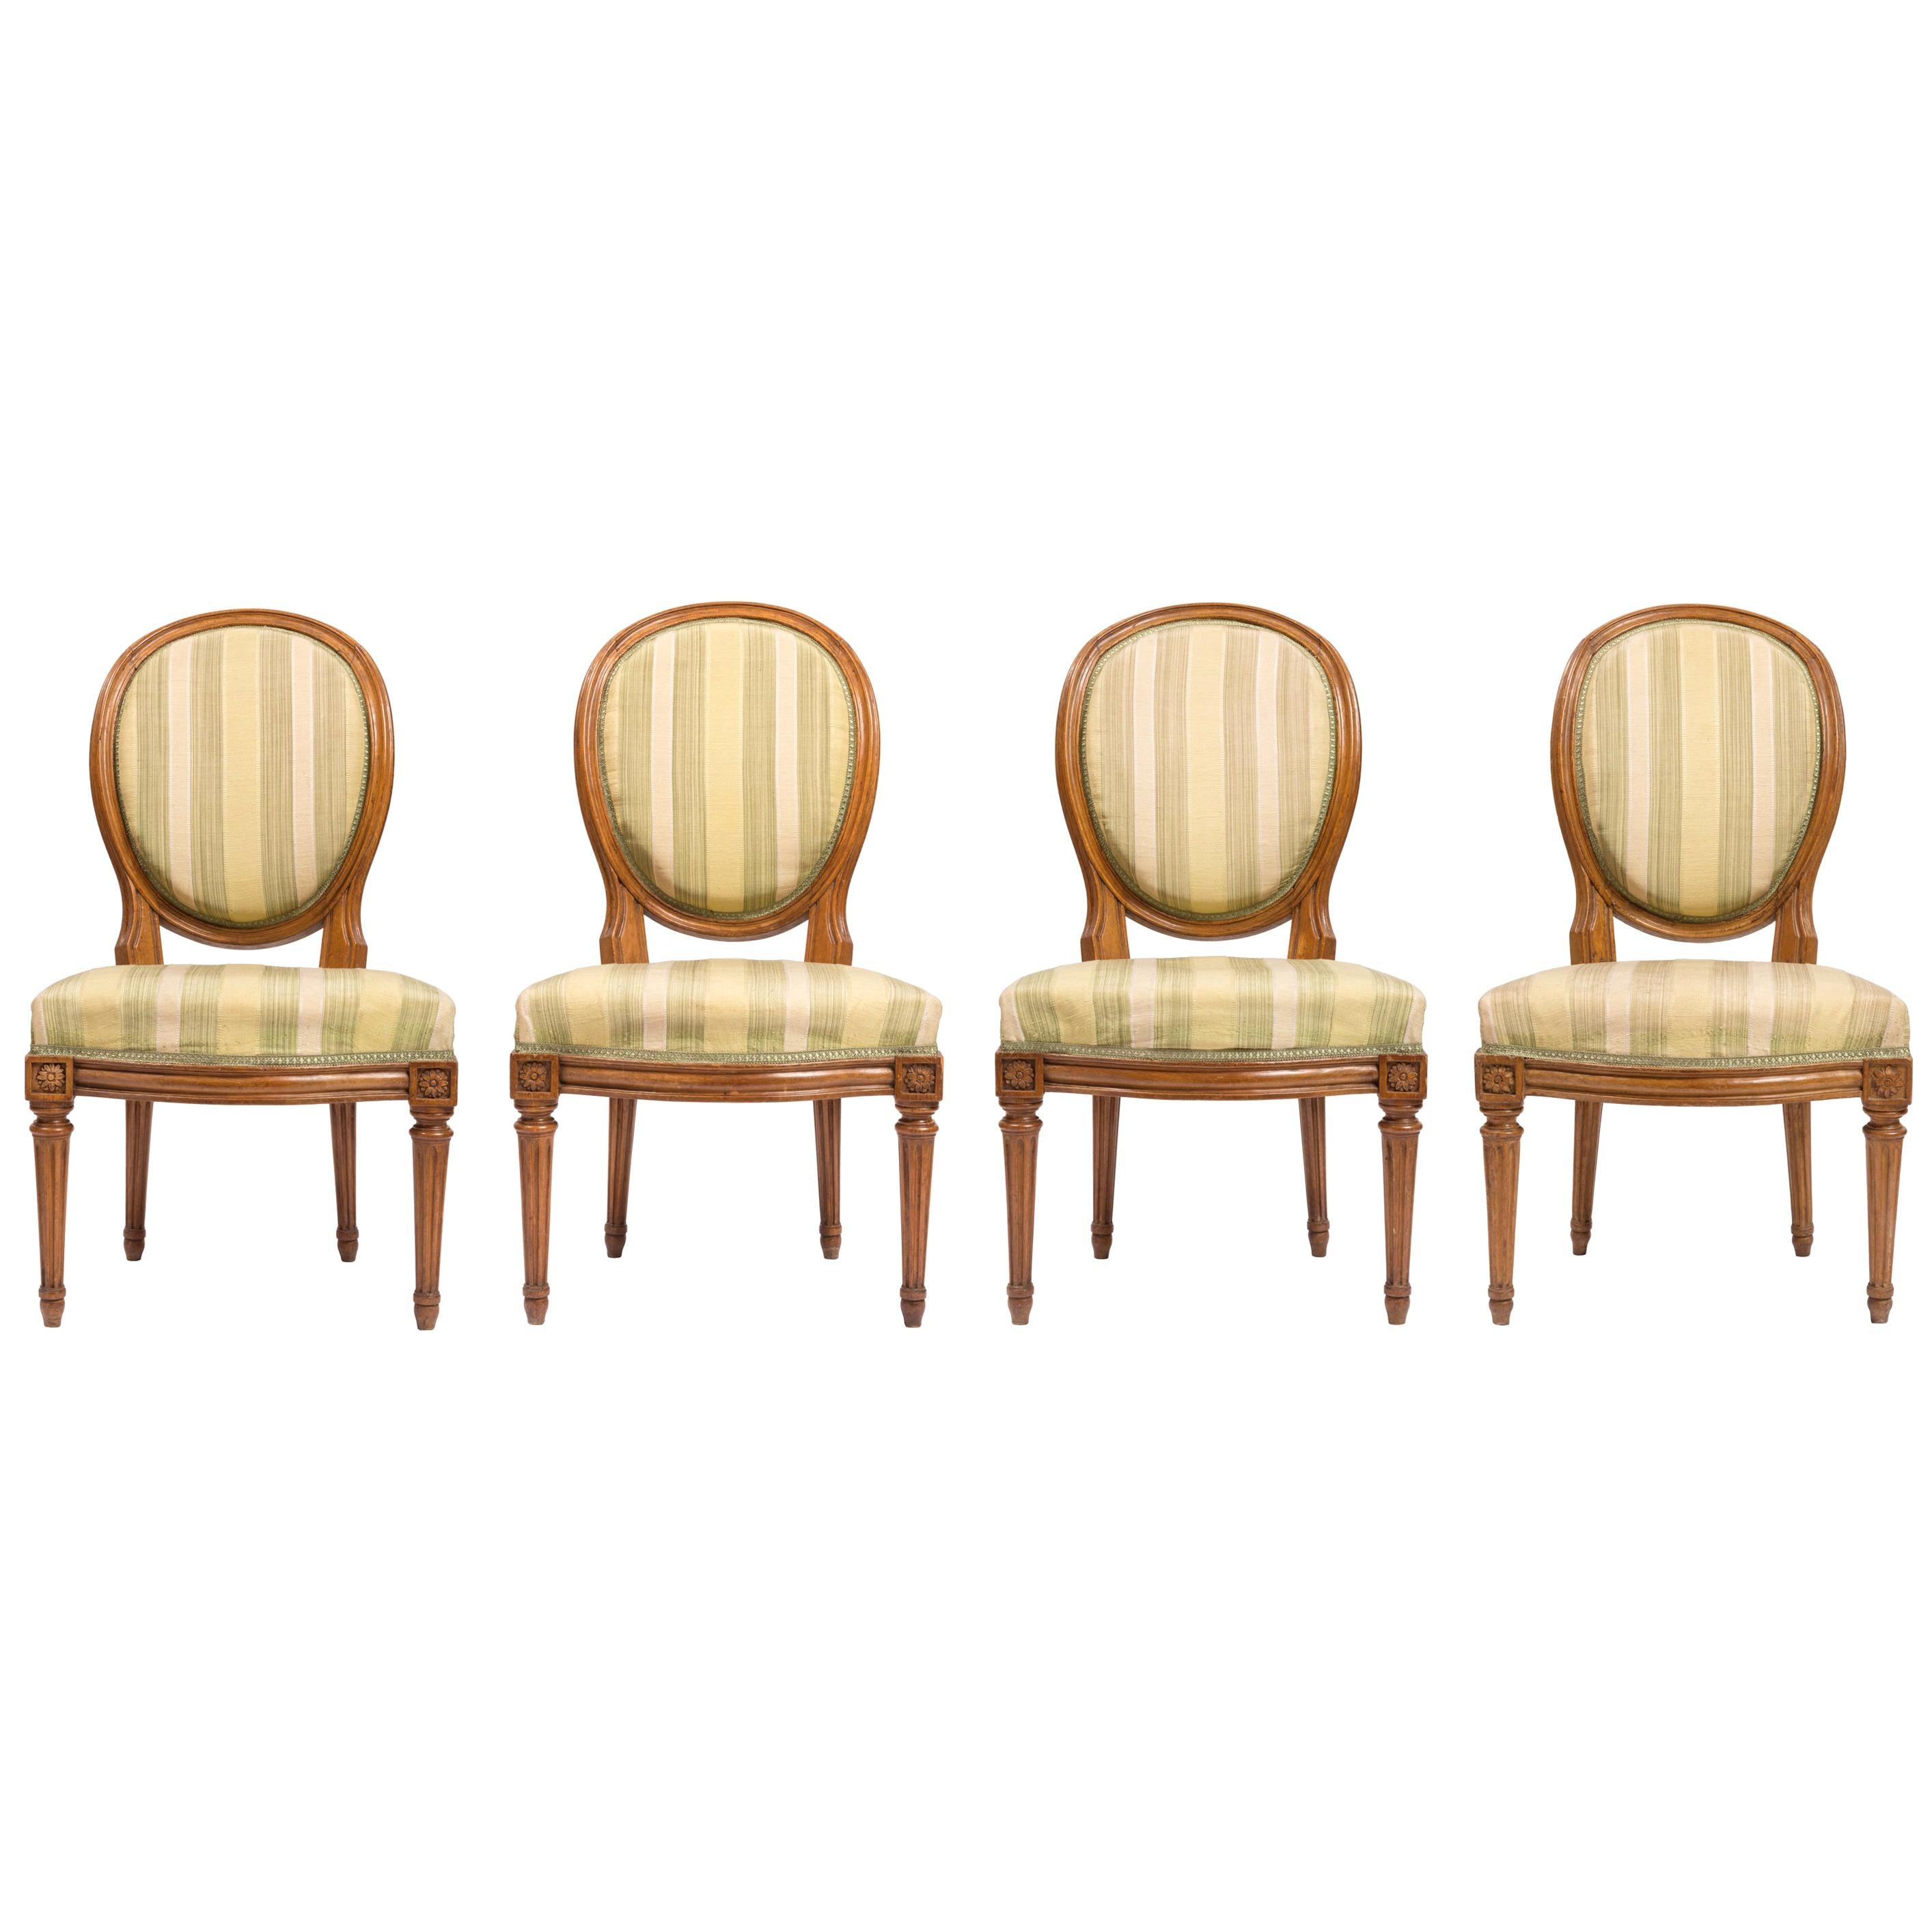 Set of Four Louis XVI Style Chairs with Striped Silk Upholstery, 19th Century For Sale